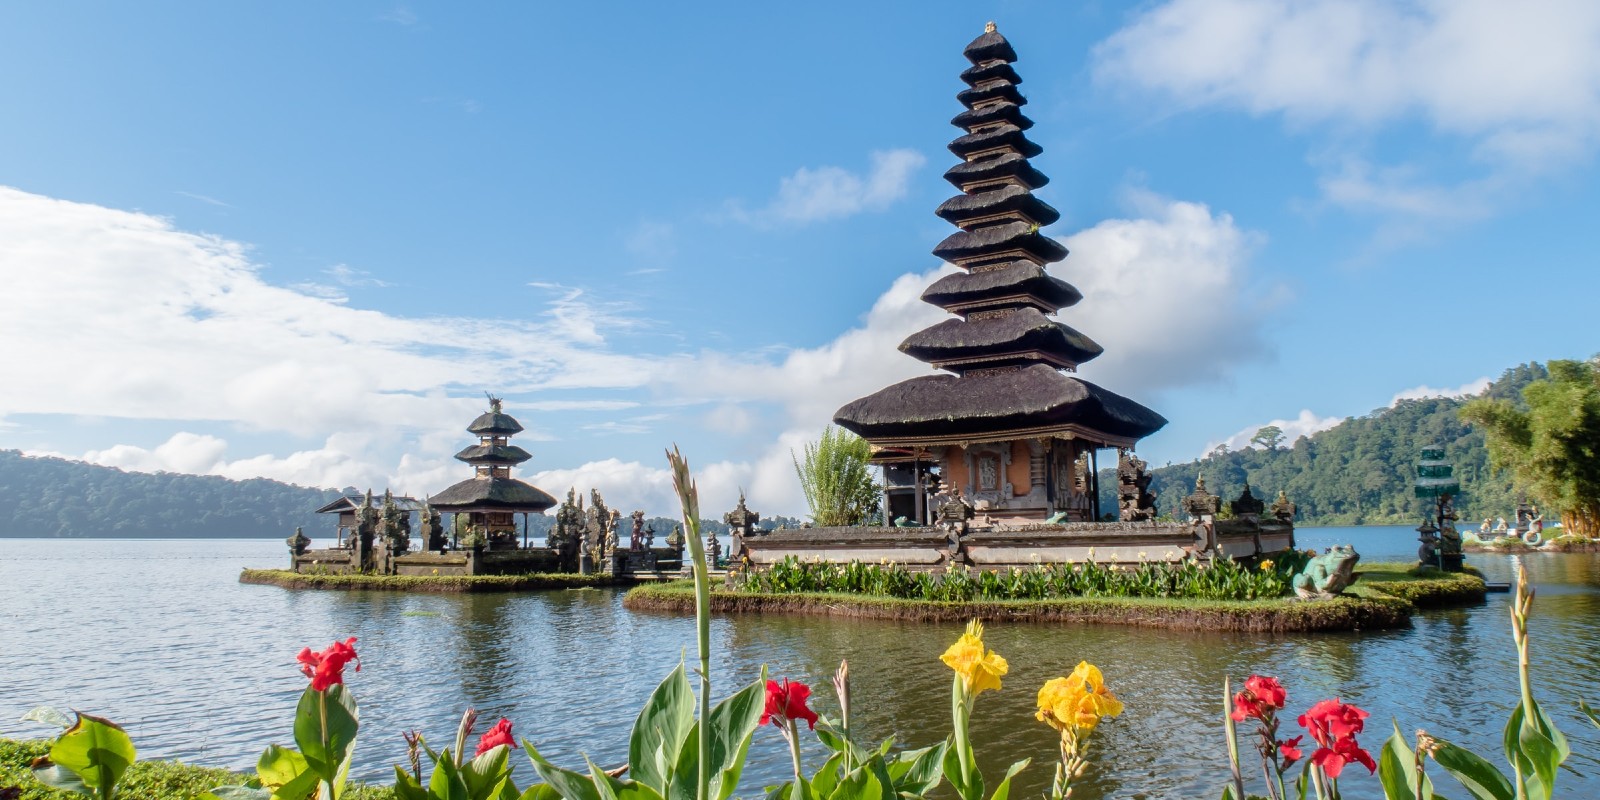 Travel blog: How to do Bali on a Budget: Our Top 7 Tips